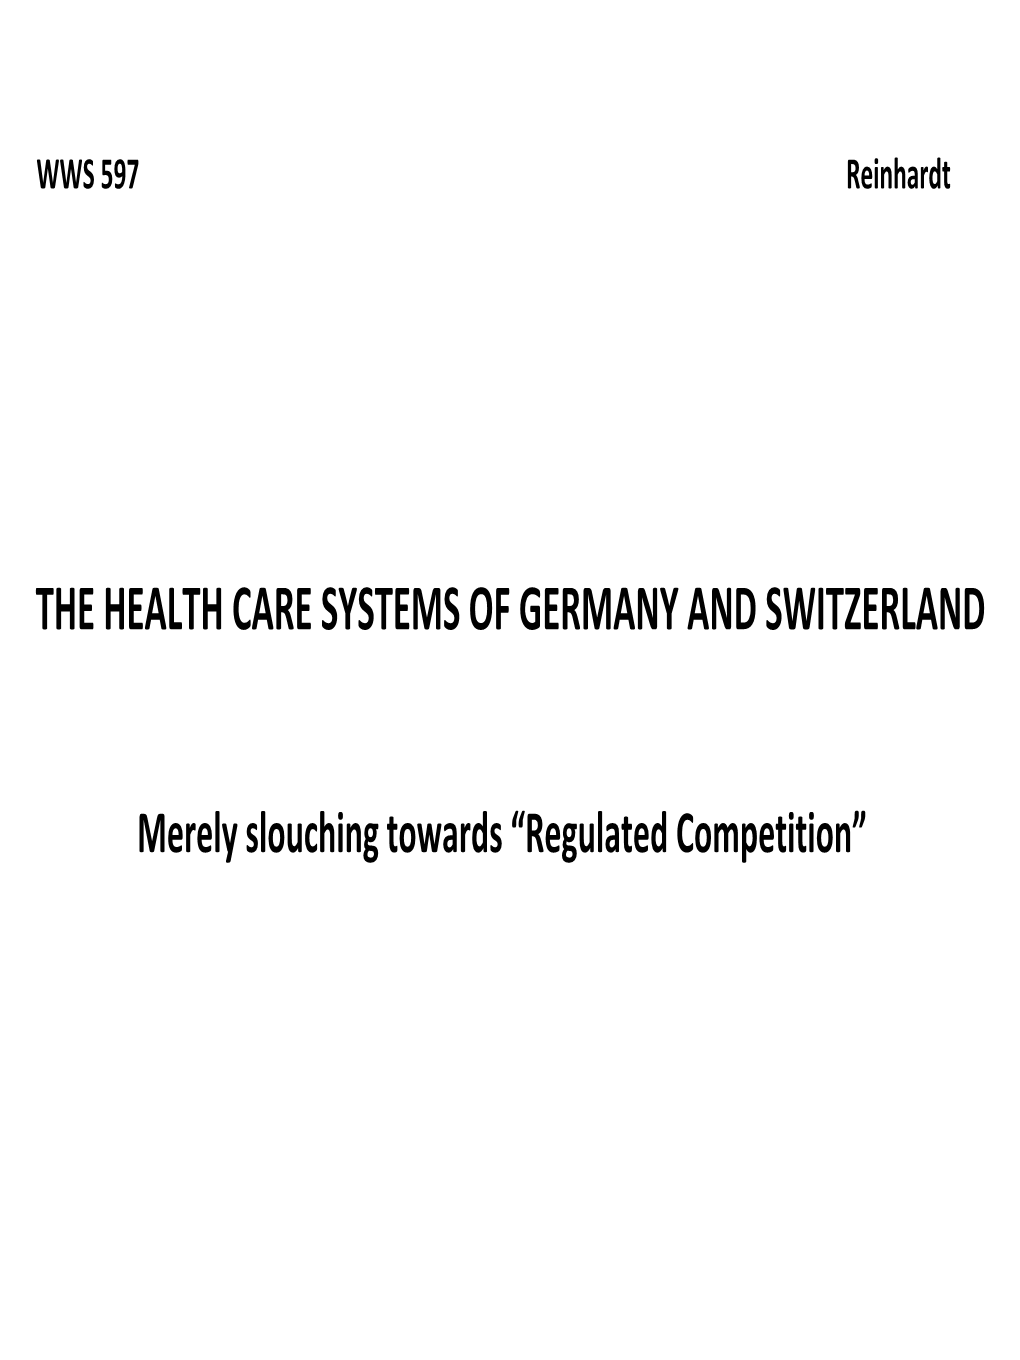 The Health Care Systems of Germany and Switzerland